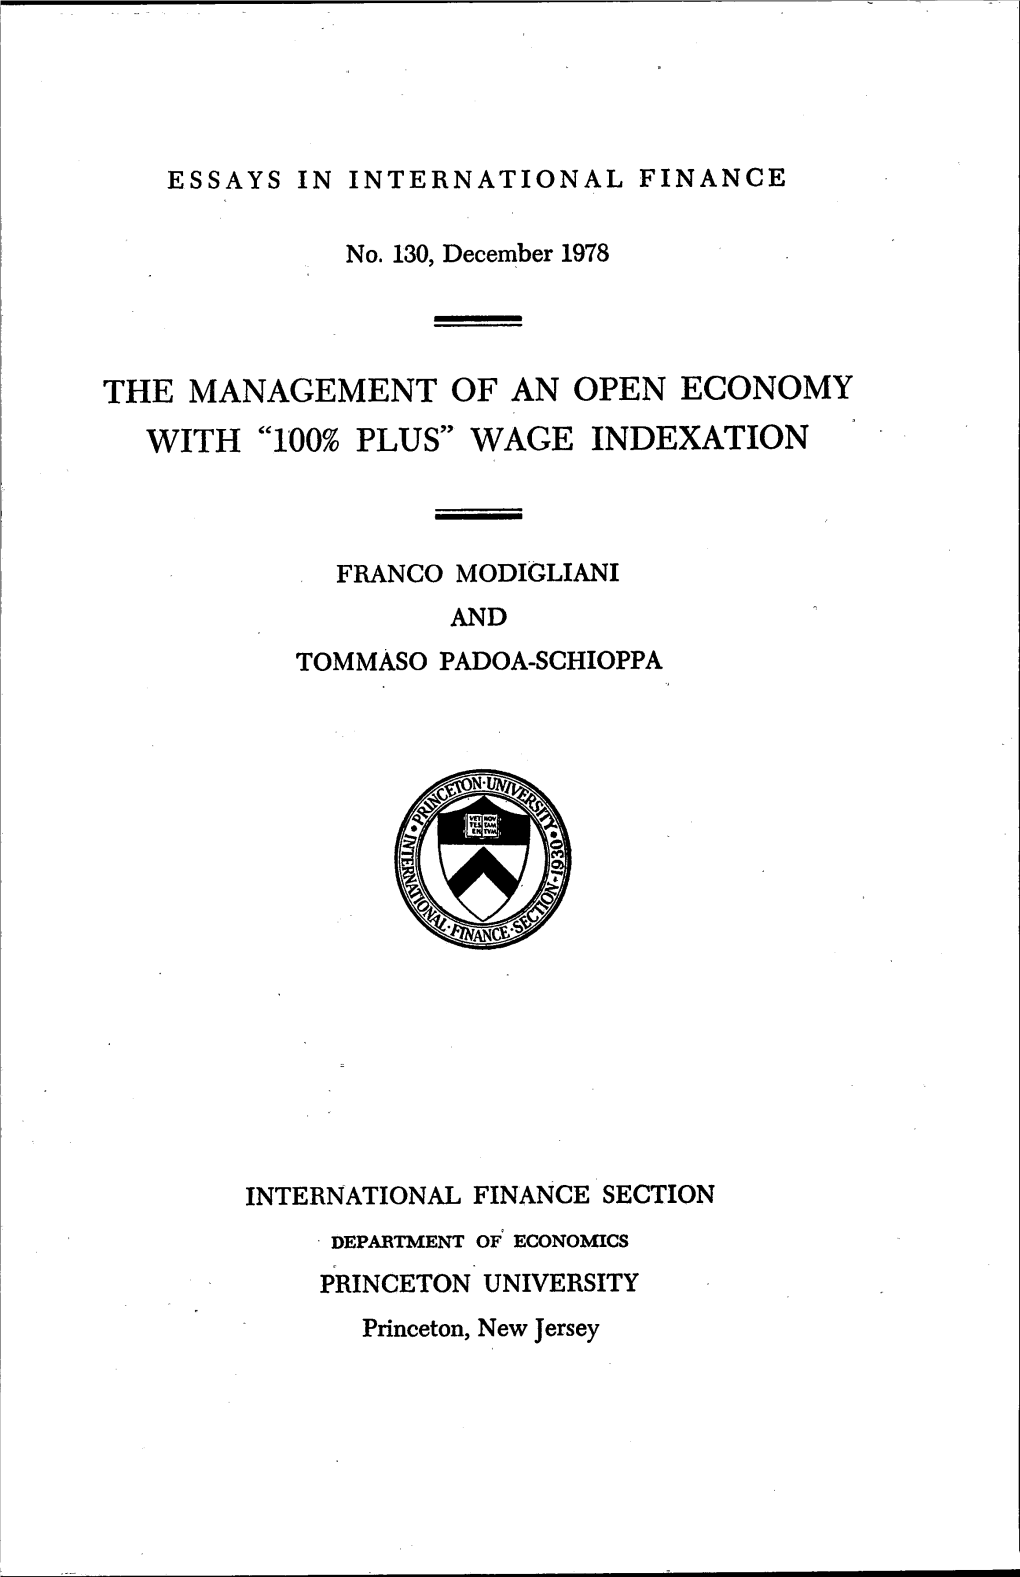 The Management of an Open Economy with 100% Plus Wage